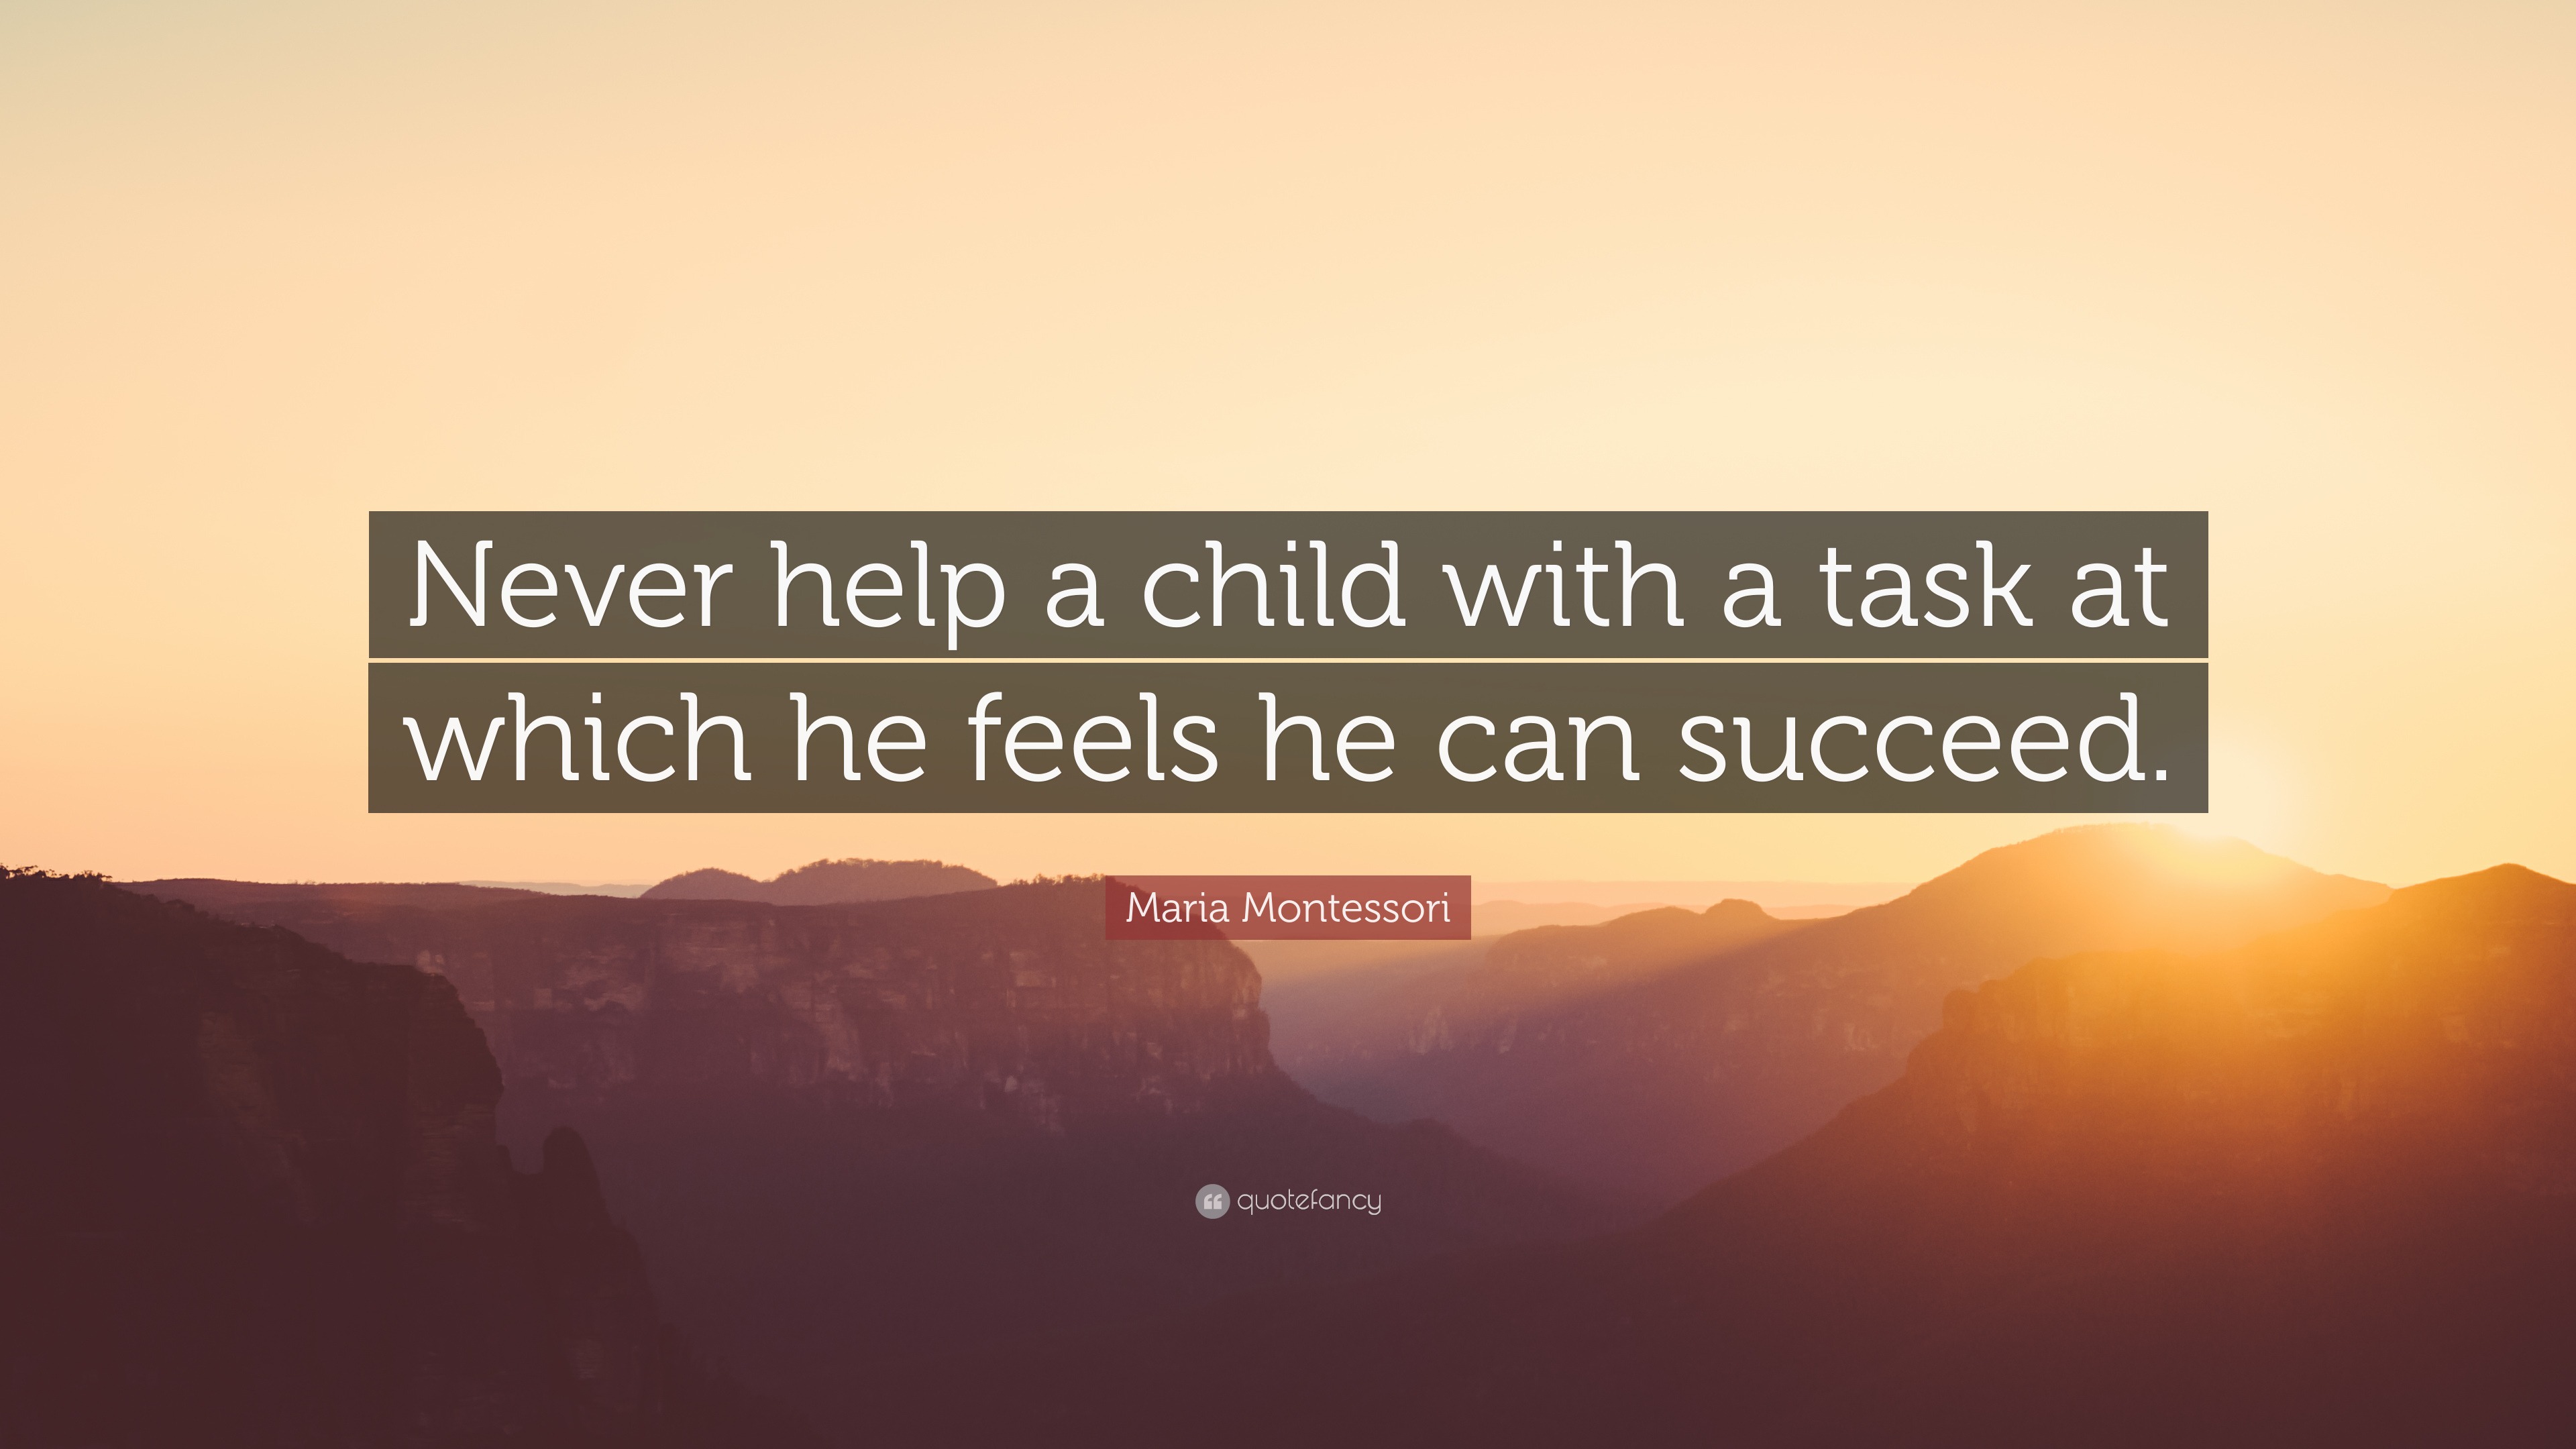 Maria Montessori Quote: “Never help a child with a task at which he ...